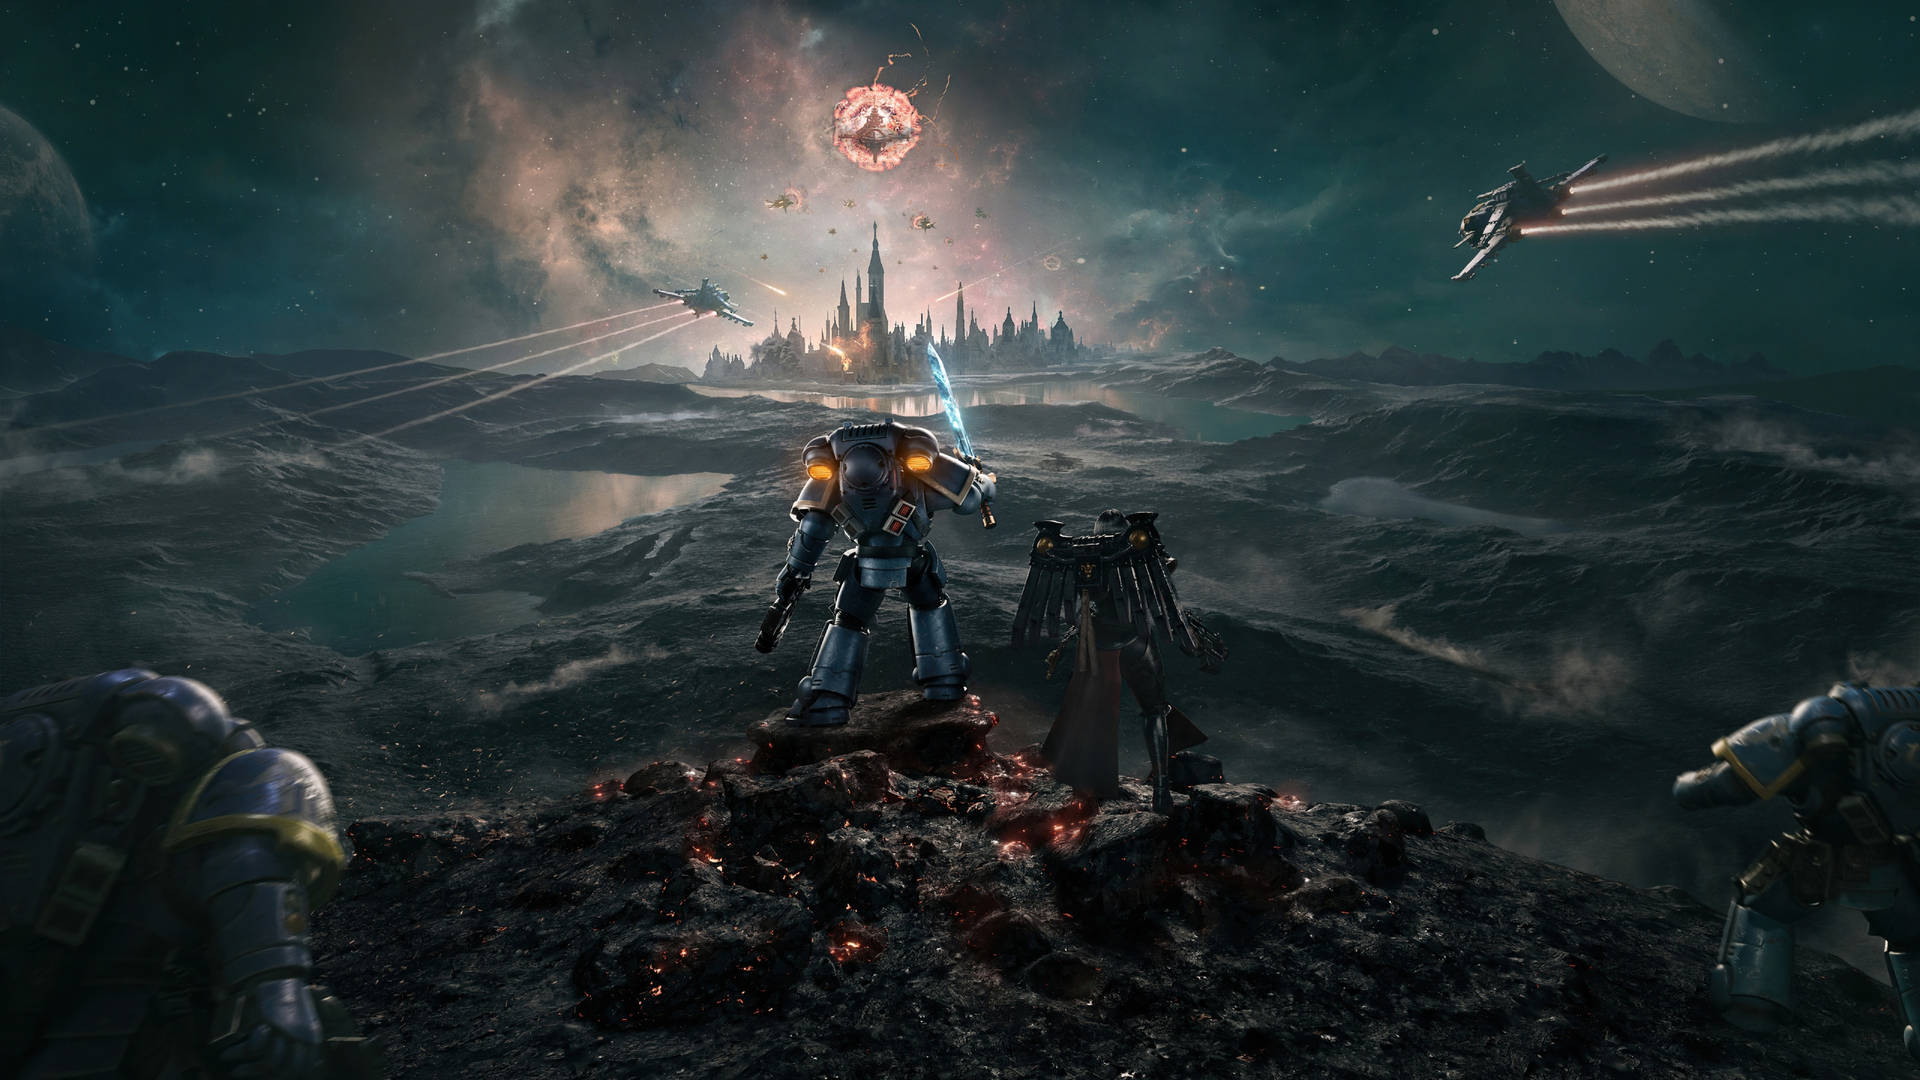 4K resolution video game graphics come to life in Starcraft Wallpaper